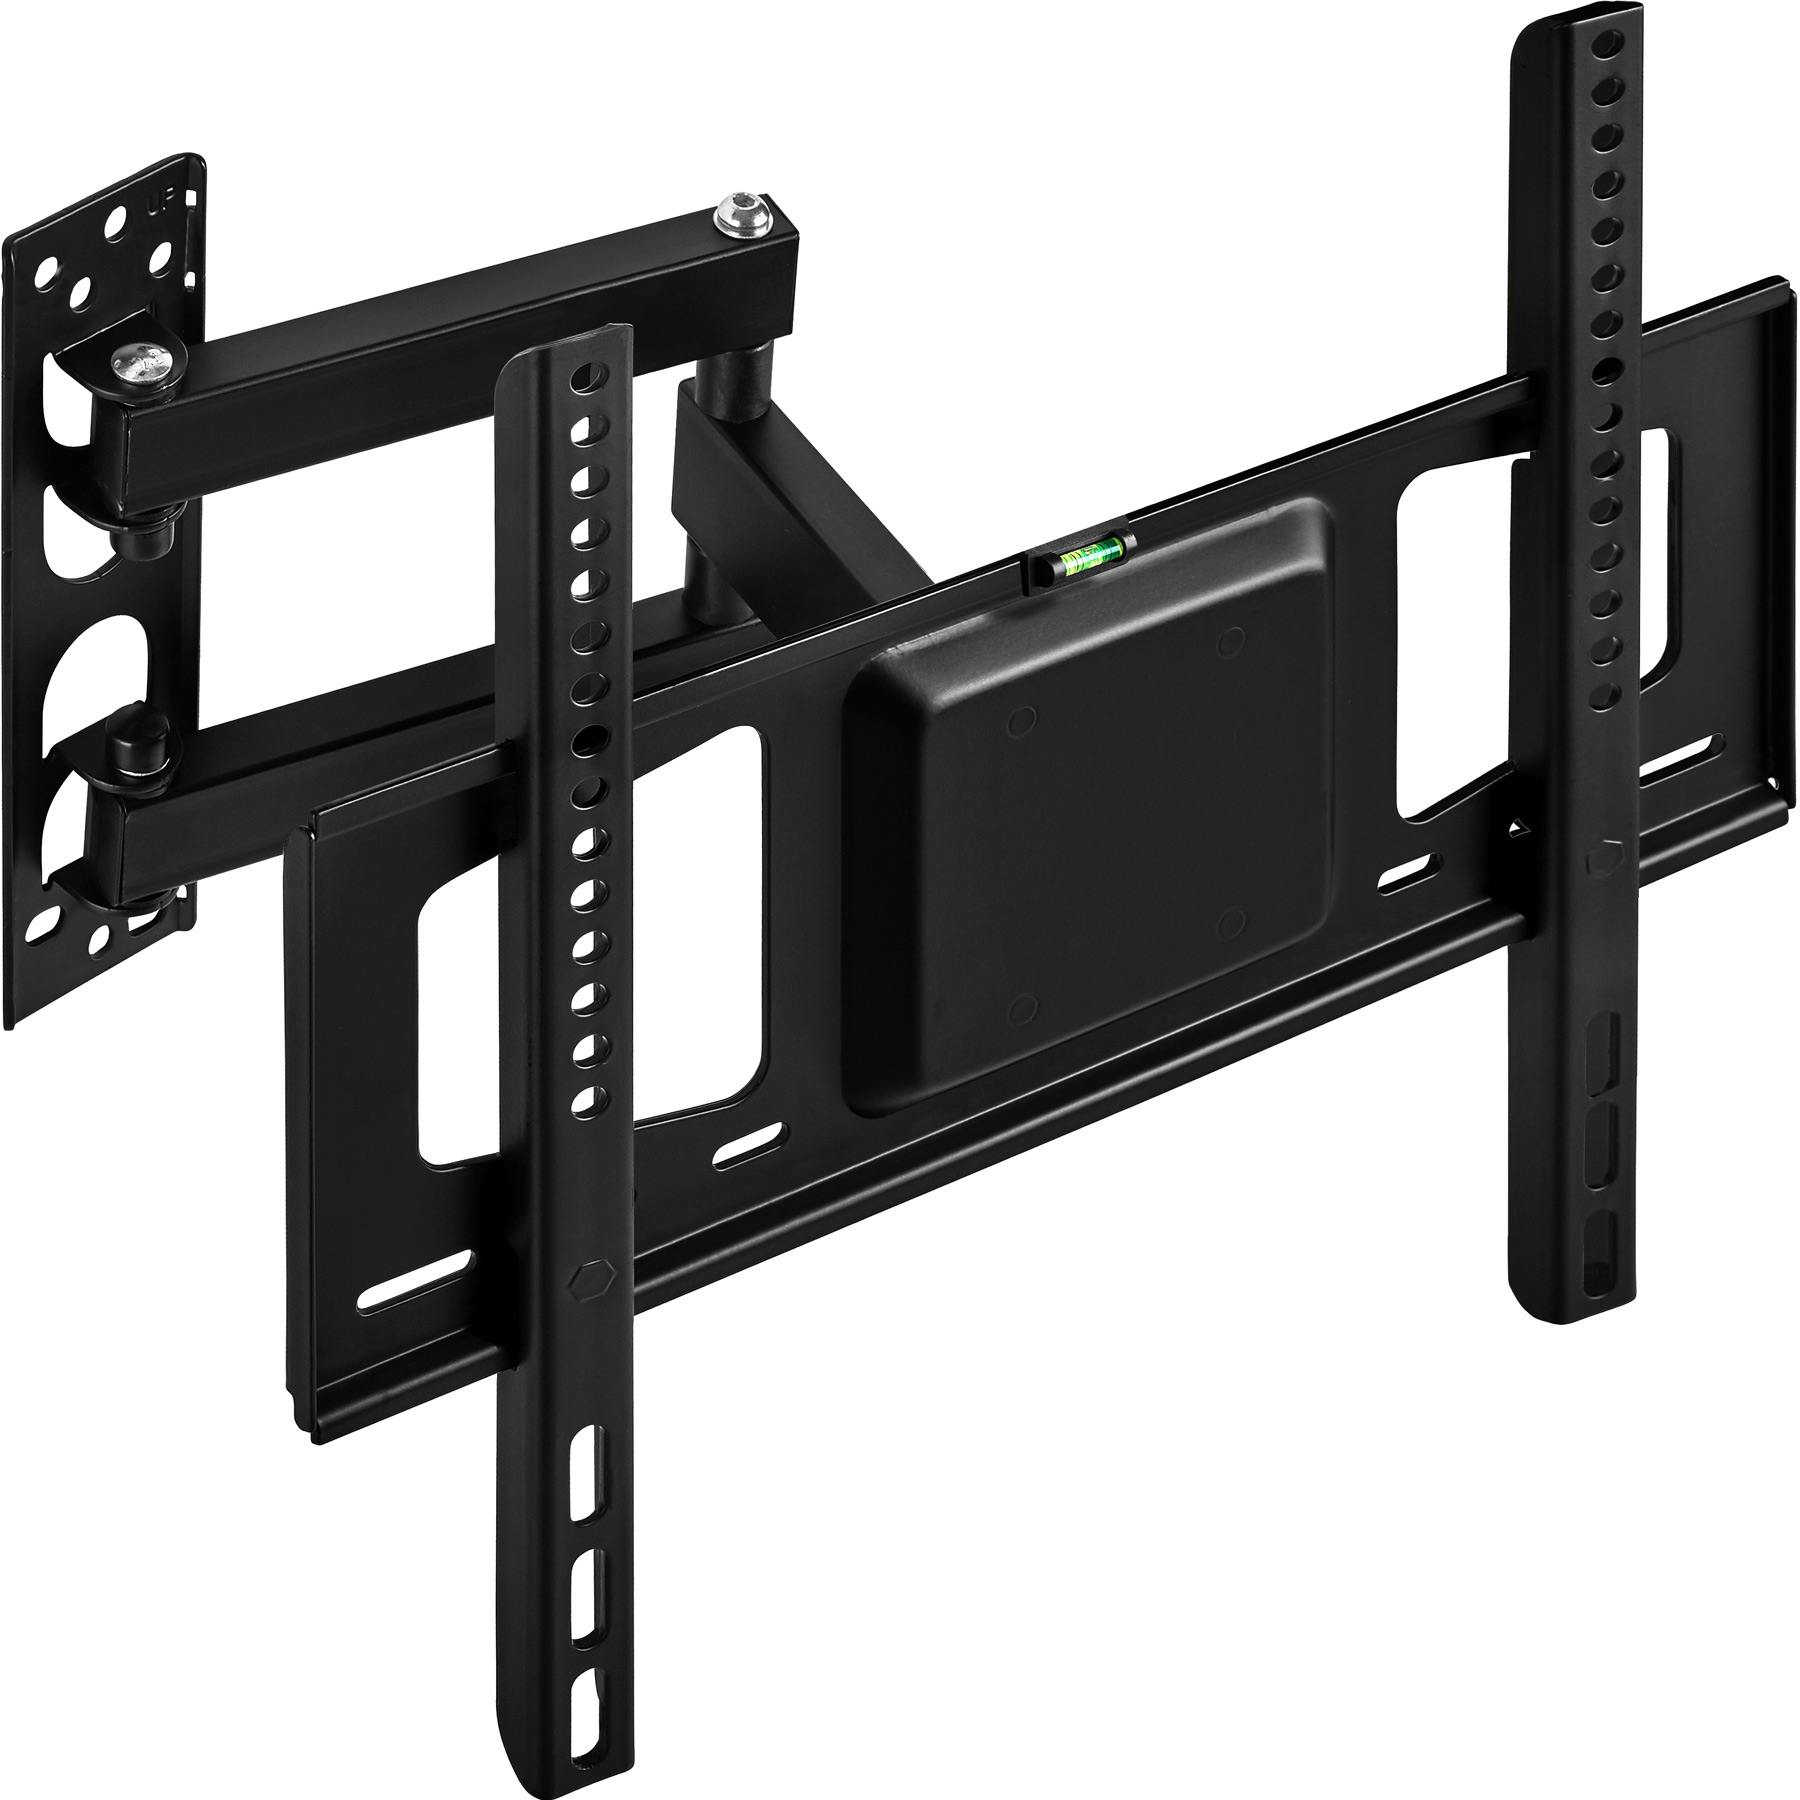 16€01 sur TecTake Support mural TV 32- 55 orientable et inclinable